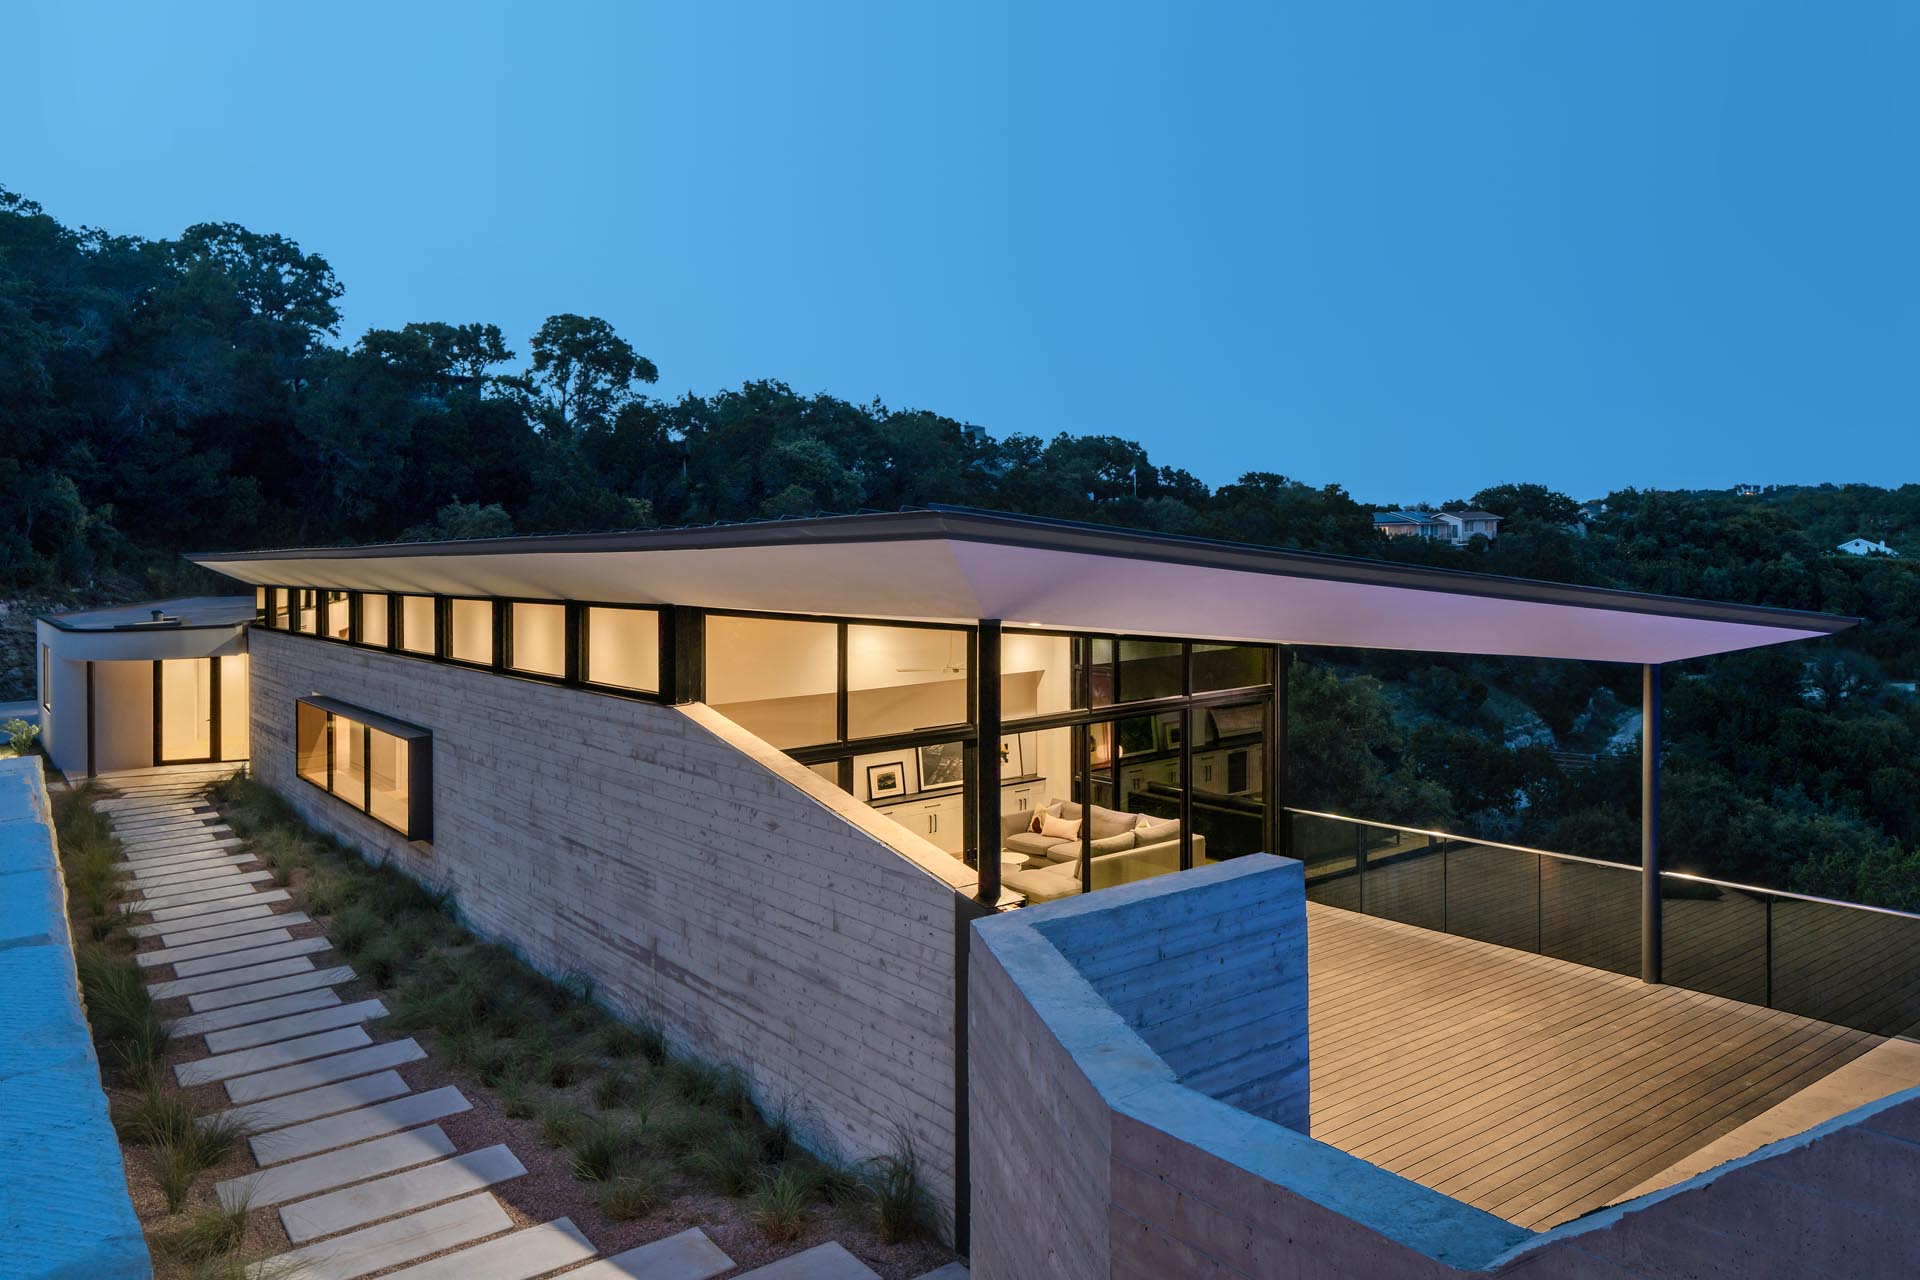 The boomerang shape of this modern home accentuates the natural curvature of the land, while high walls lined with clerestory windows create a buffer between the busy adjacent road while also balancing light throughout the day.